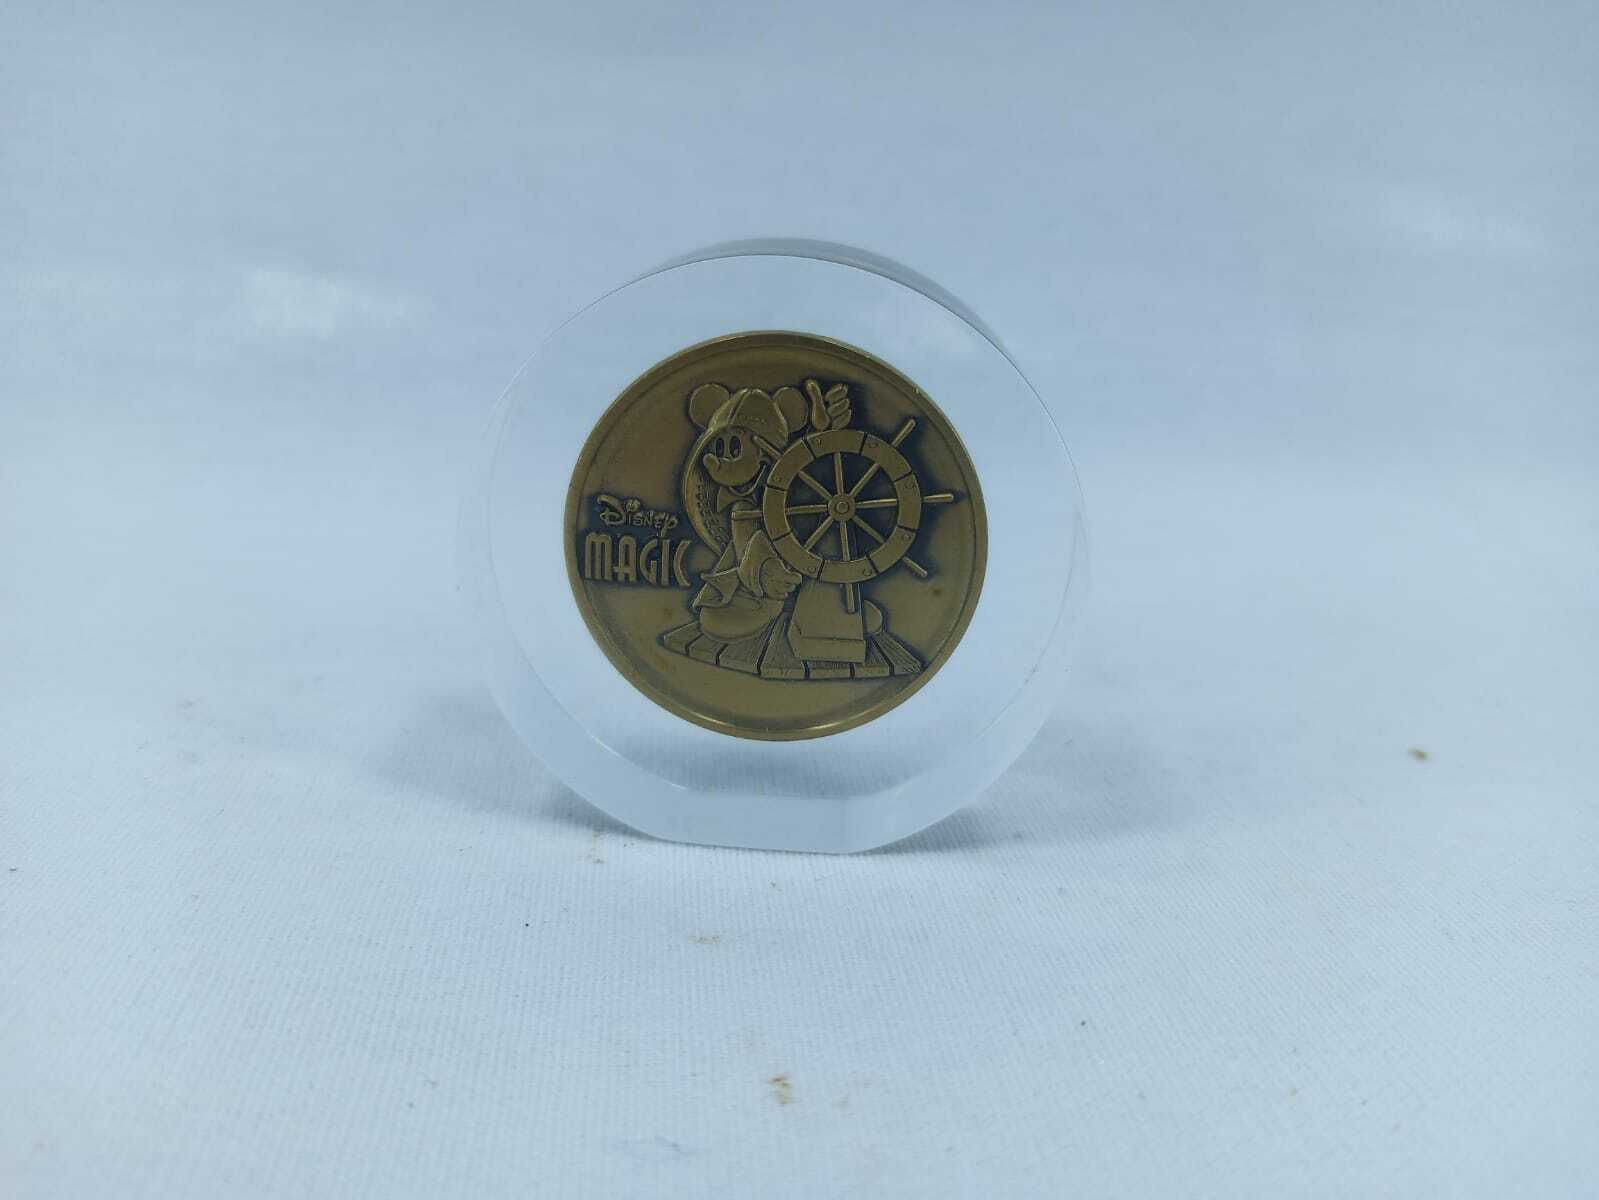 Vintage 1998 Disney Cruise Line Disney Magic Inaugural Voyages Coin Paperweight